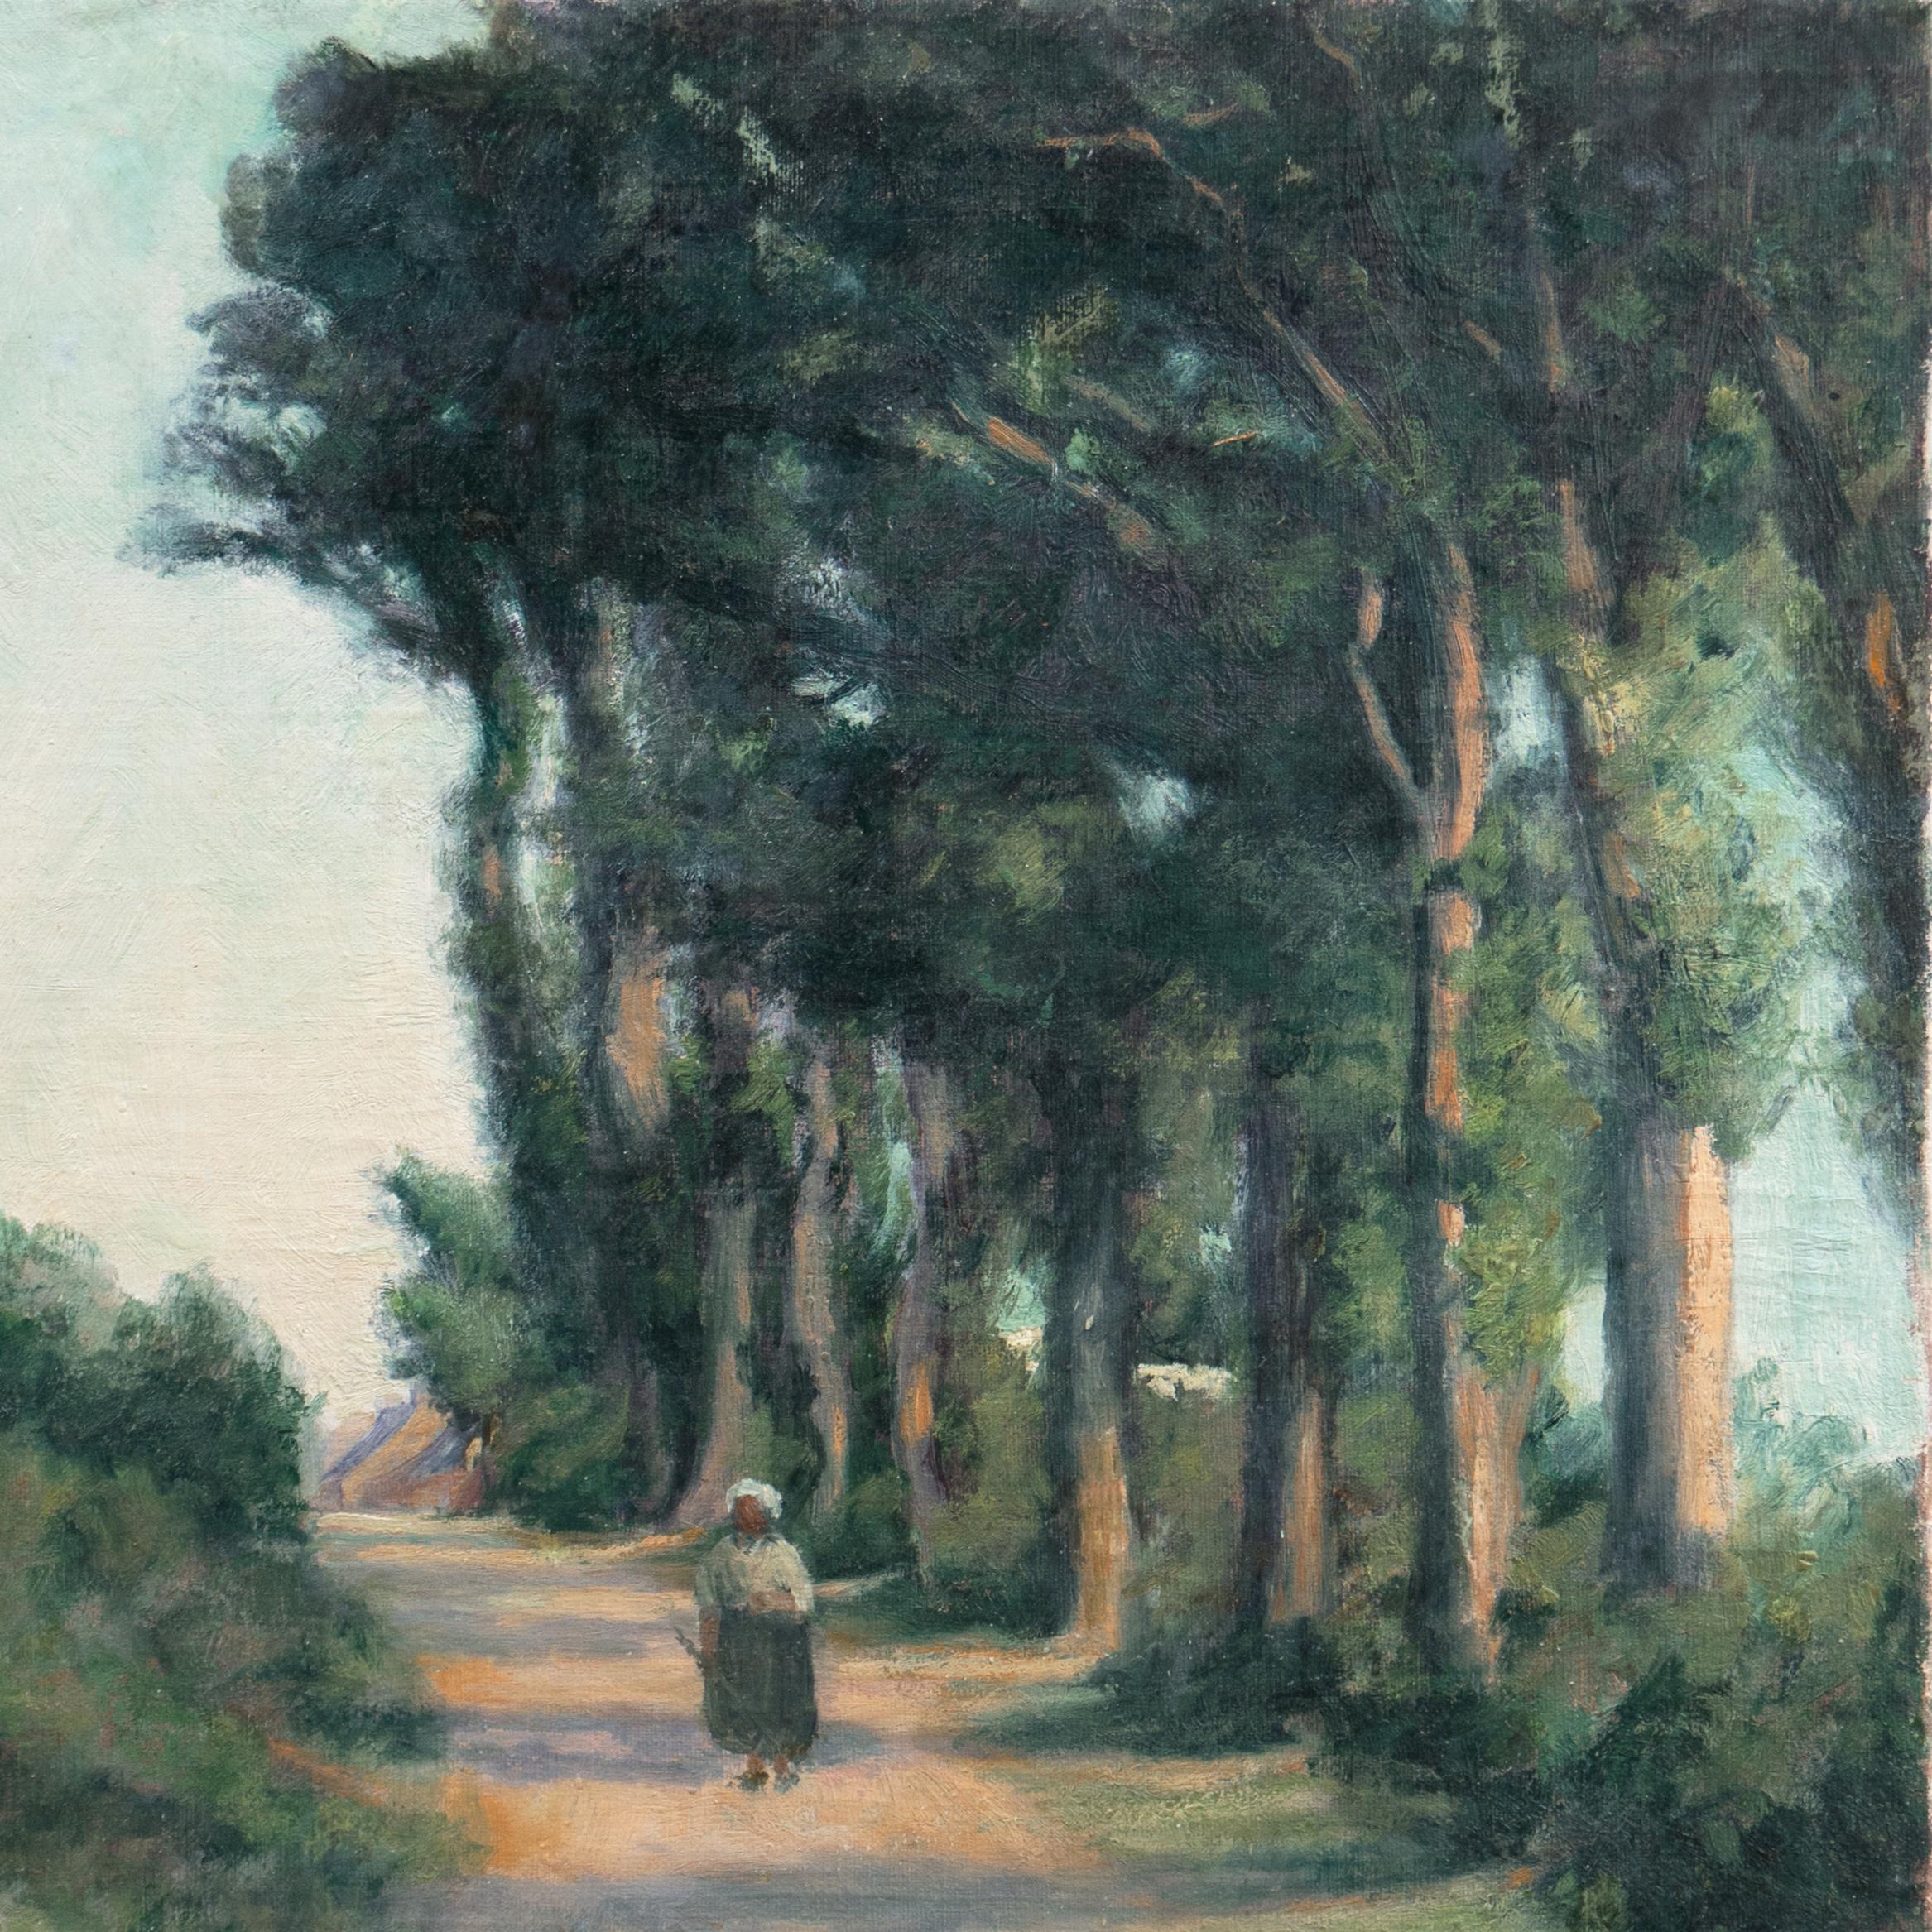 'Eucalyptus Road, Sunset', Early 20th Century, American Impressionist Landscape - Gray Landscape Painting by American School